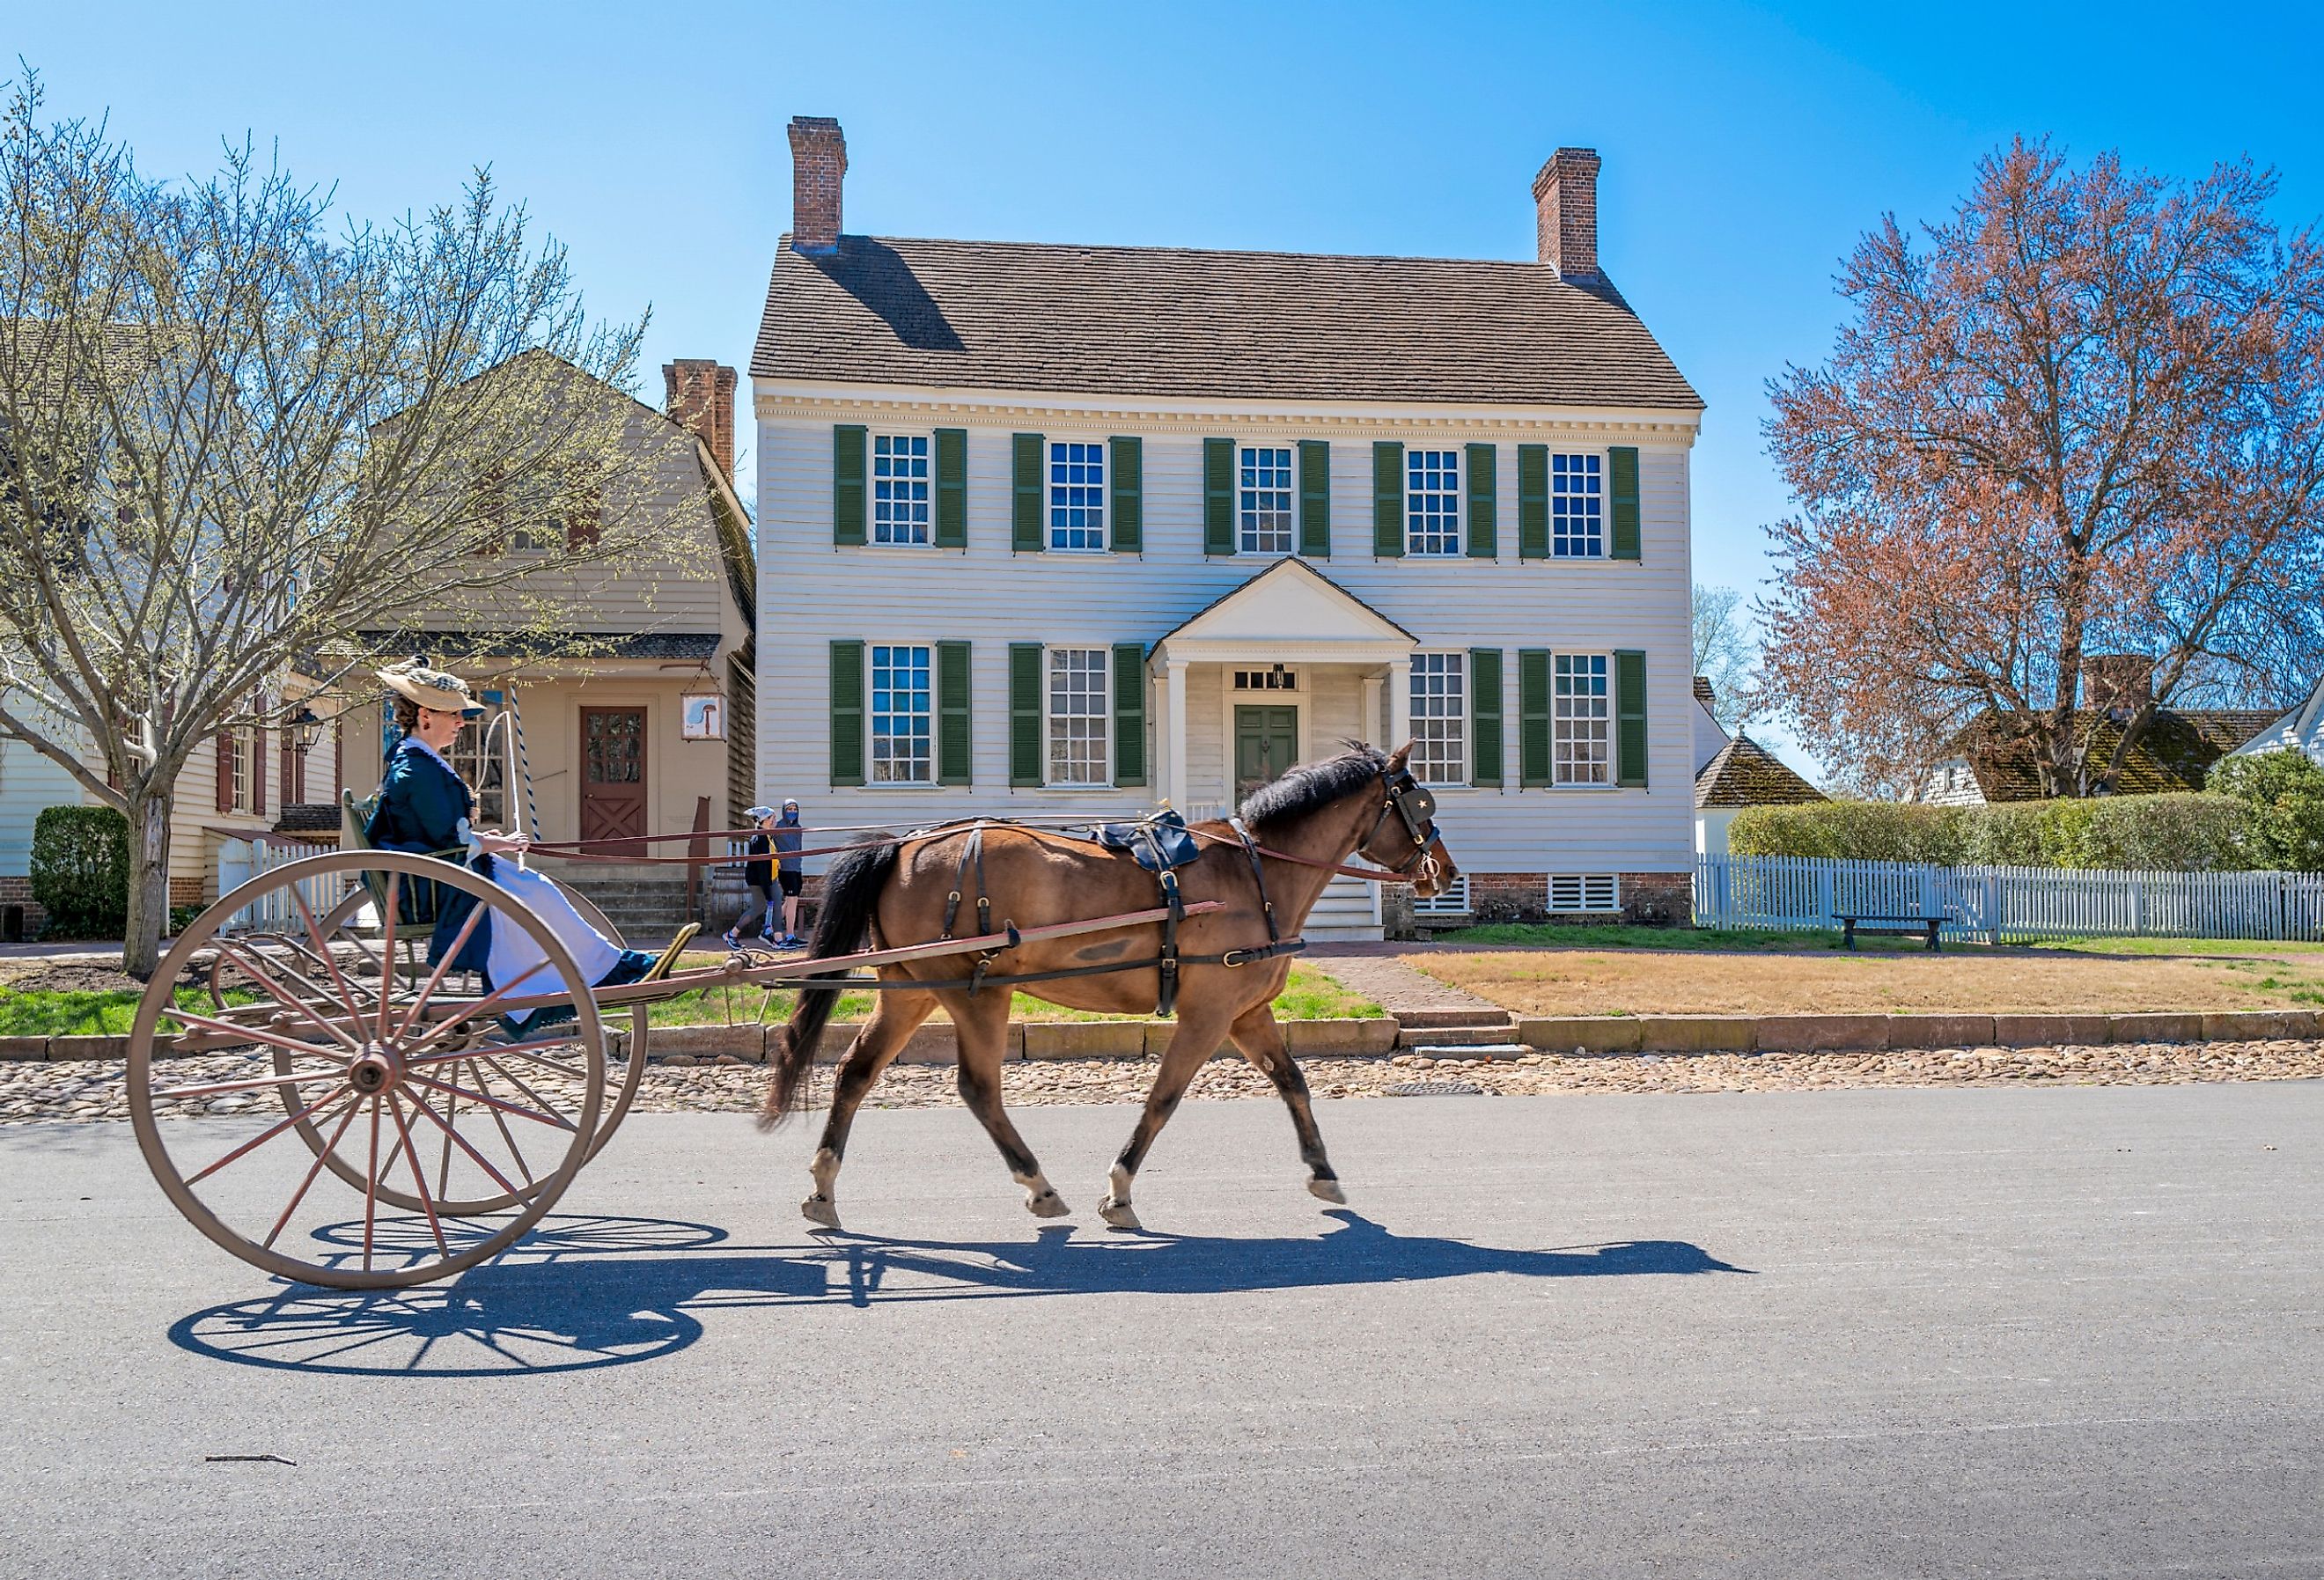 Woman riding on a horse and buggy in colonial Williamsburg, Virginia, at the end of winter.